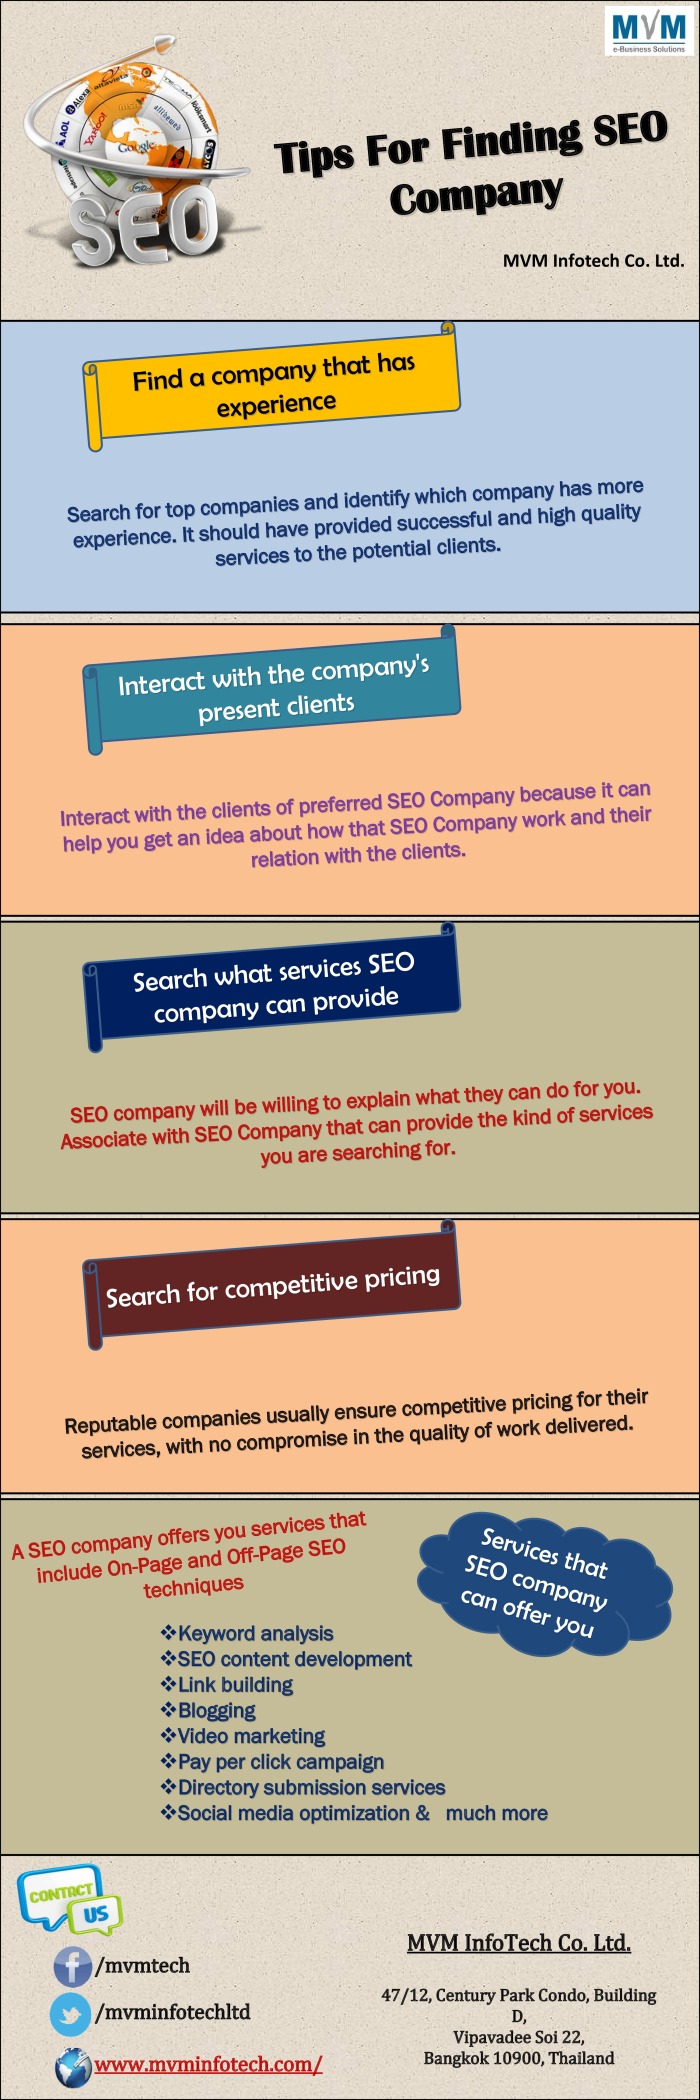 Tips For Finding SEO Company